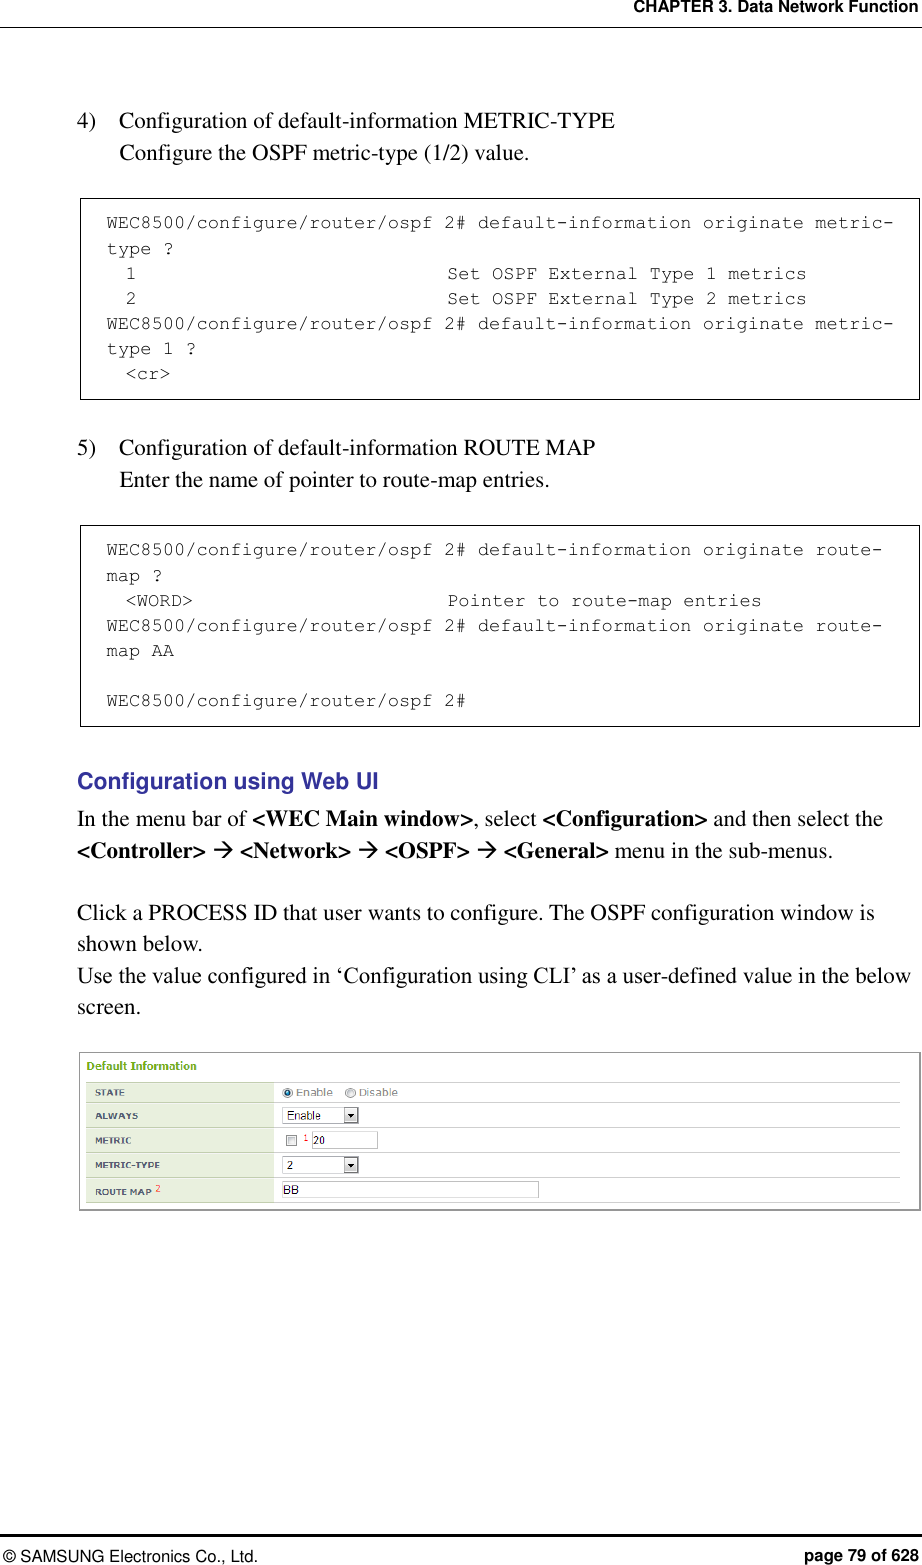 CHAPTER 3. Data Network Function ©  SAMSUNG Electronics Co., Ltd.  page 79 of 628 4)    Configuration of default-information METRIC-TYPE   Configure the OSPF metric-type (1/2) value.    WEC8500/configure/router/ospf 2# default-information originate metric-type ?   1                                Set OSPF External Type 1 metrics   2                                Set OSPF External Type 2 metrics WEC8500/configure/router/ospf 2# default-information originate metric-type 1 ?   &lt;cr&gt;  5)    Configuration of default-information ROUTE MAP   Enter the name of pointer to route-map entries.    WEC8500/configure/router/ospf 2# default-information originate route-map ?   &lt;WORD&gt;                           Pointer to route-map entries WEC8500/configure/router/ospf 2# default-information originate route-map AA   WEC8500/configure/router/ospf 2#  Configuration using Web UI In the menu bar of &lt;WEC Main window&gt;, select &lt;Configuration&gt; and then select the &lt;Controller&gt;  &lt;Network&gt;  &lt;OSPF&gt;  &lt;General&gt; menu in the sub-menus.    Click a PROCESS ID that user wants to configure. The OSPF configuration window is shown below.   Use the value configured in ‘Configuration using CLI’ as a user-defined value in the below screen.   